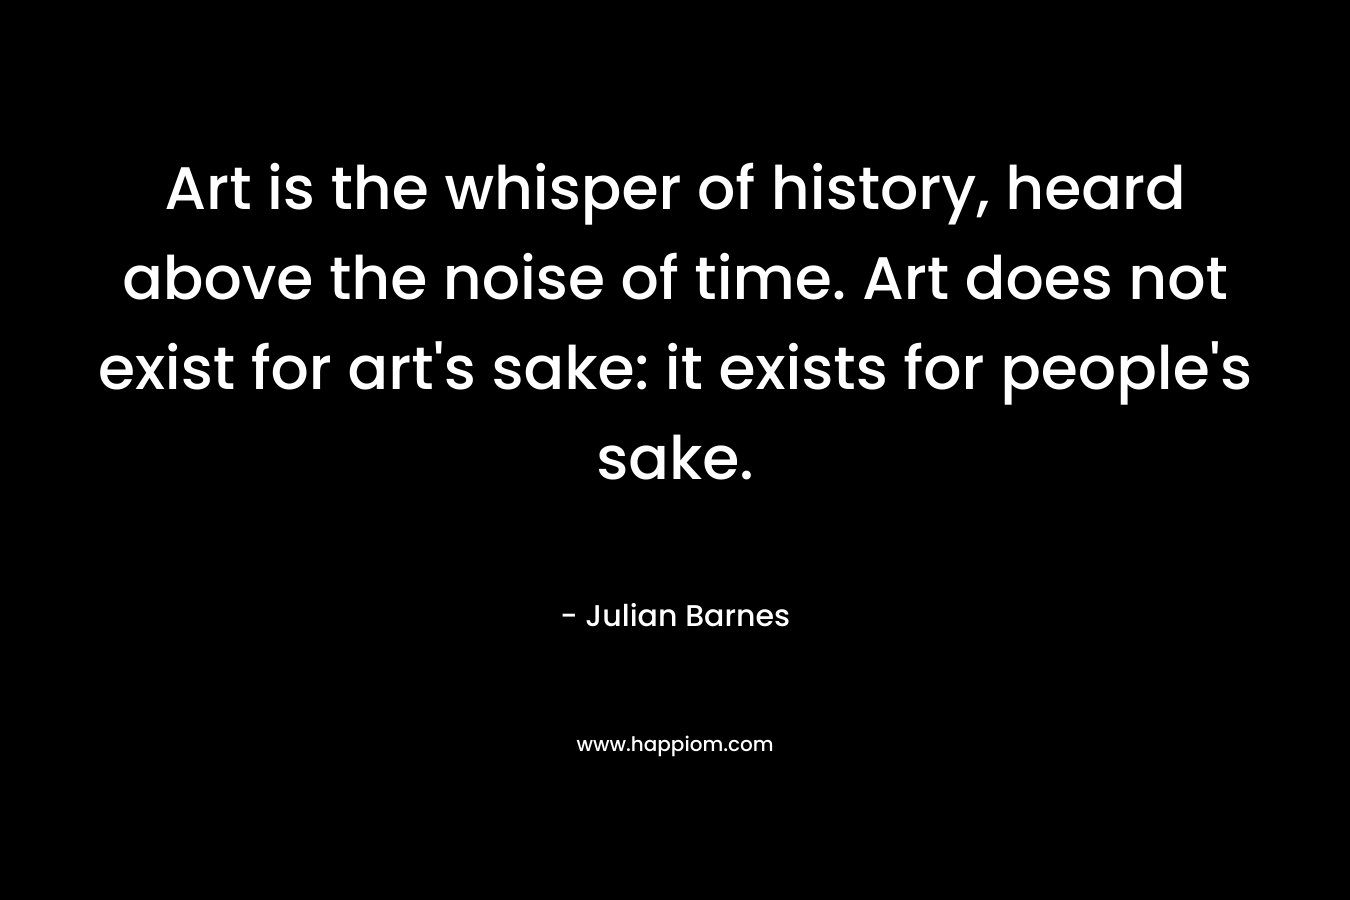 Art is the whisper of history, heard above the noise of time. Art does not exist for art's sake: it exists for people's sake.